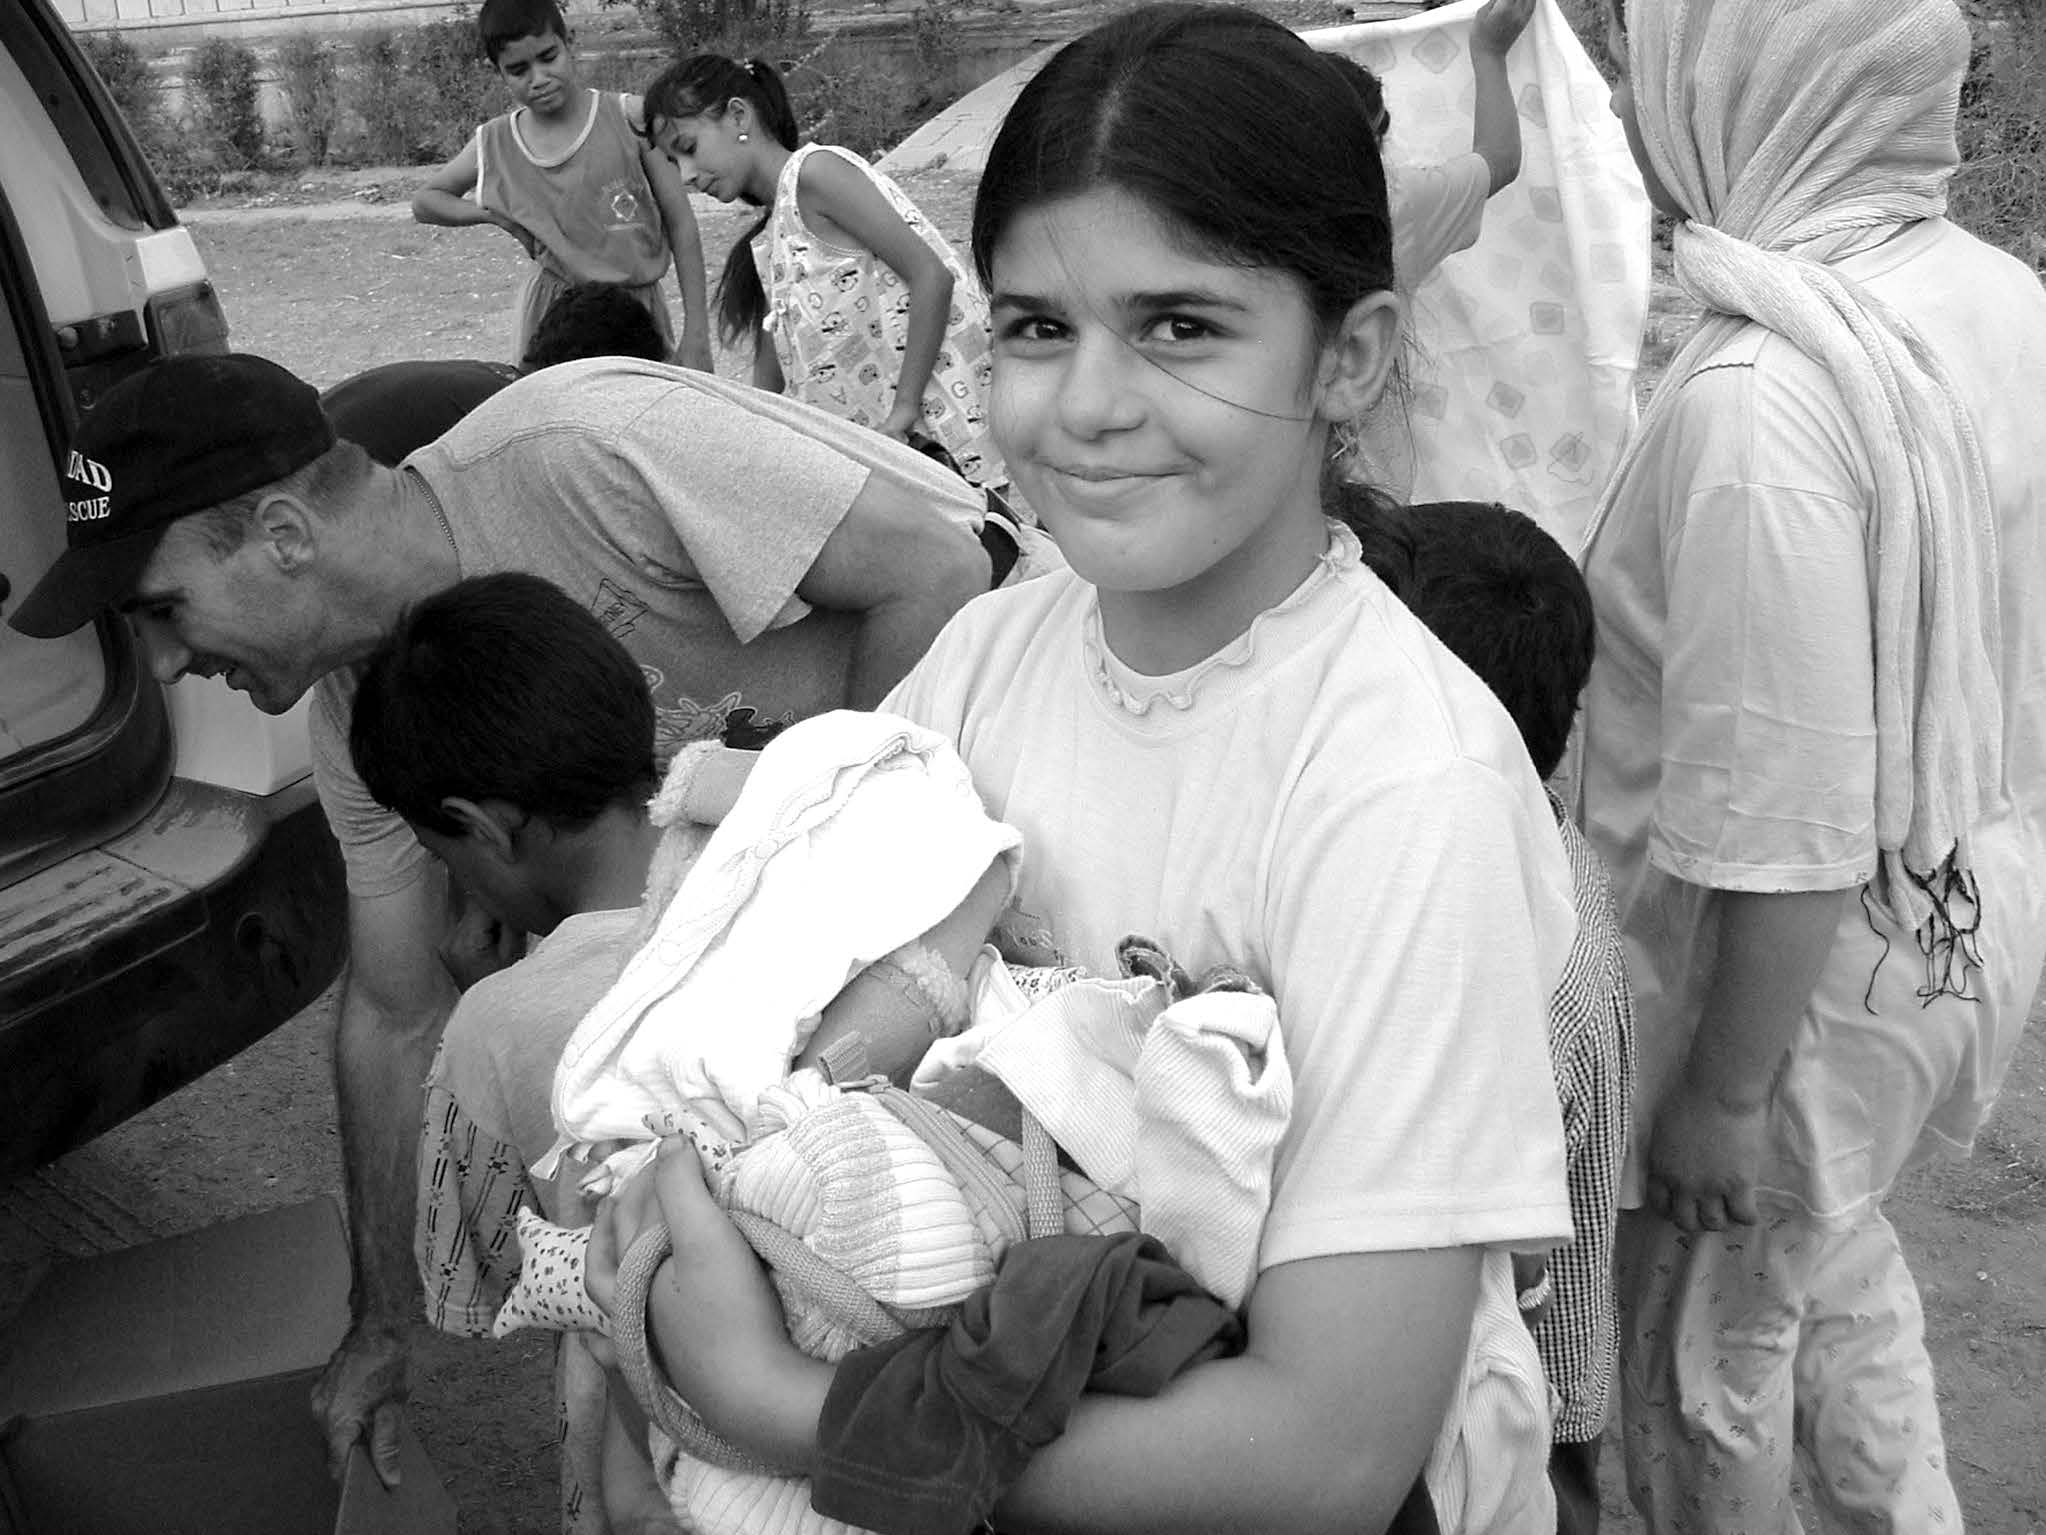 A smiling Iraqi girl carrying clothes donated by American supporters. Courtesy of Michael McMaken.